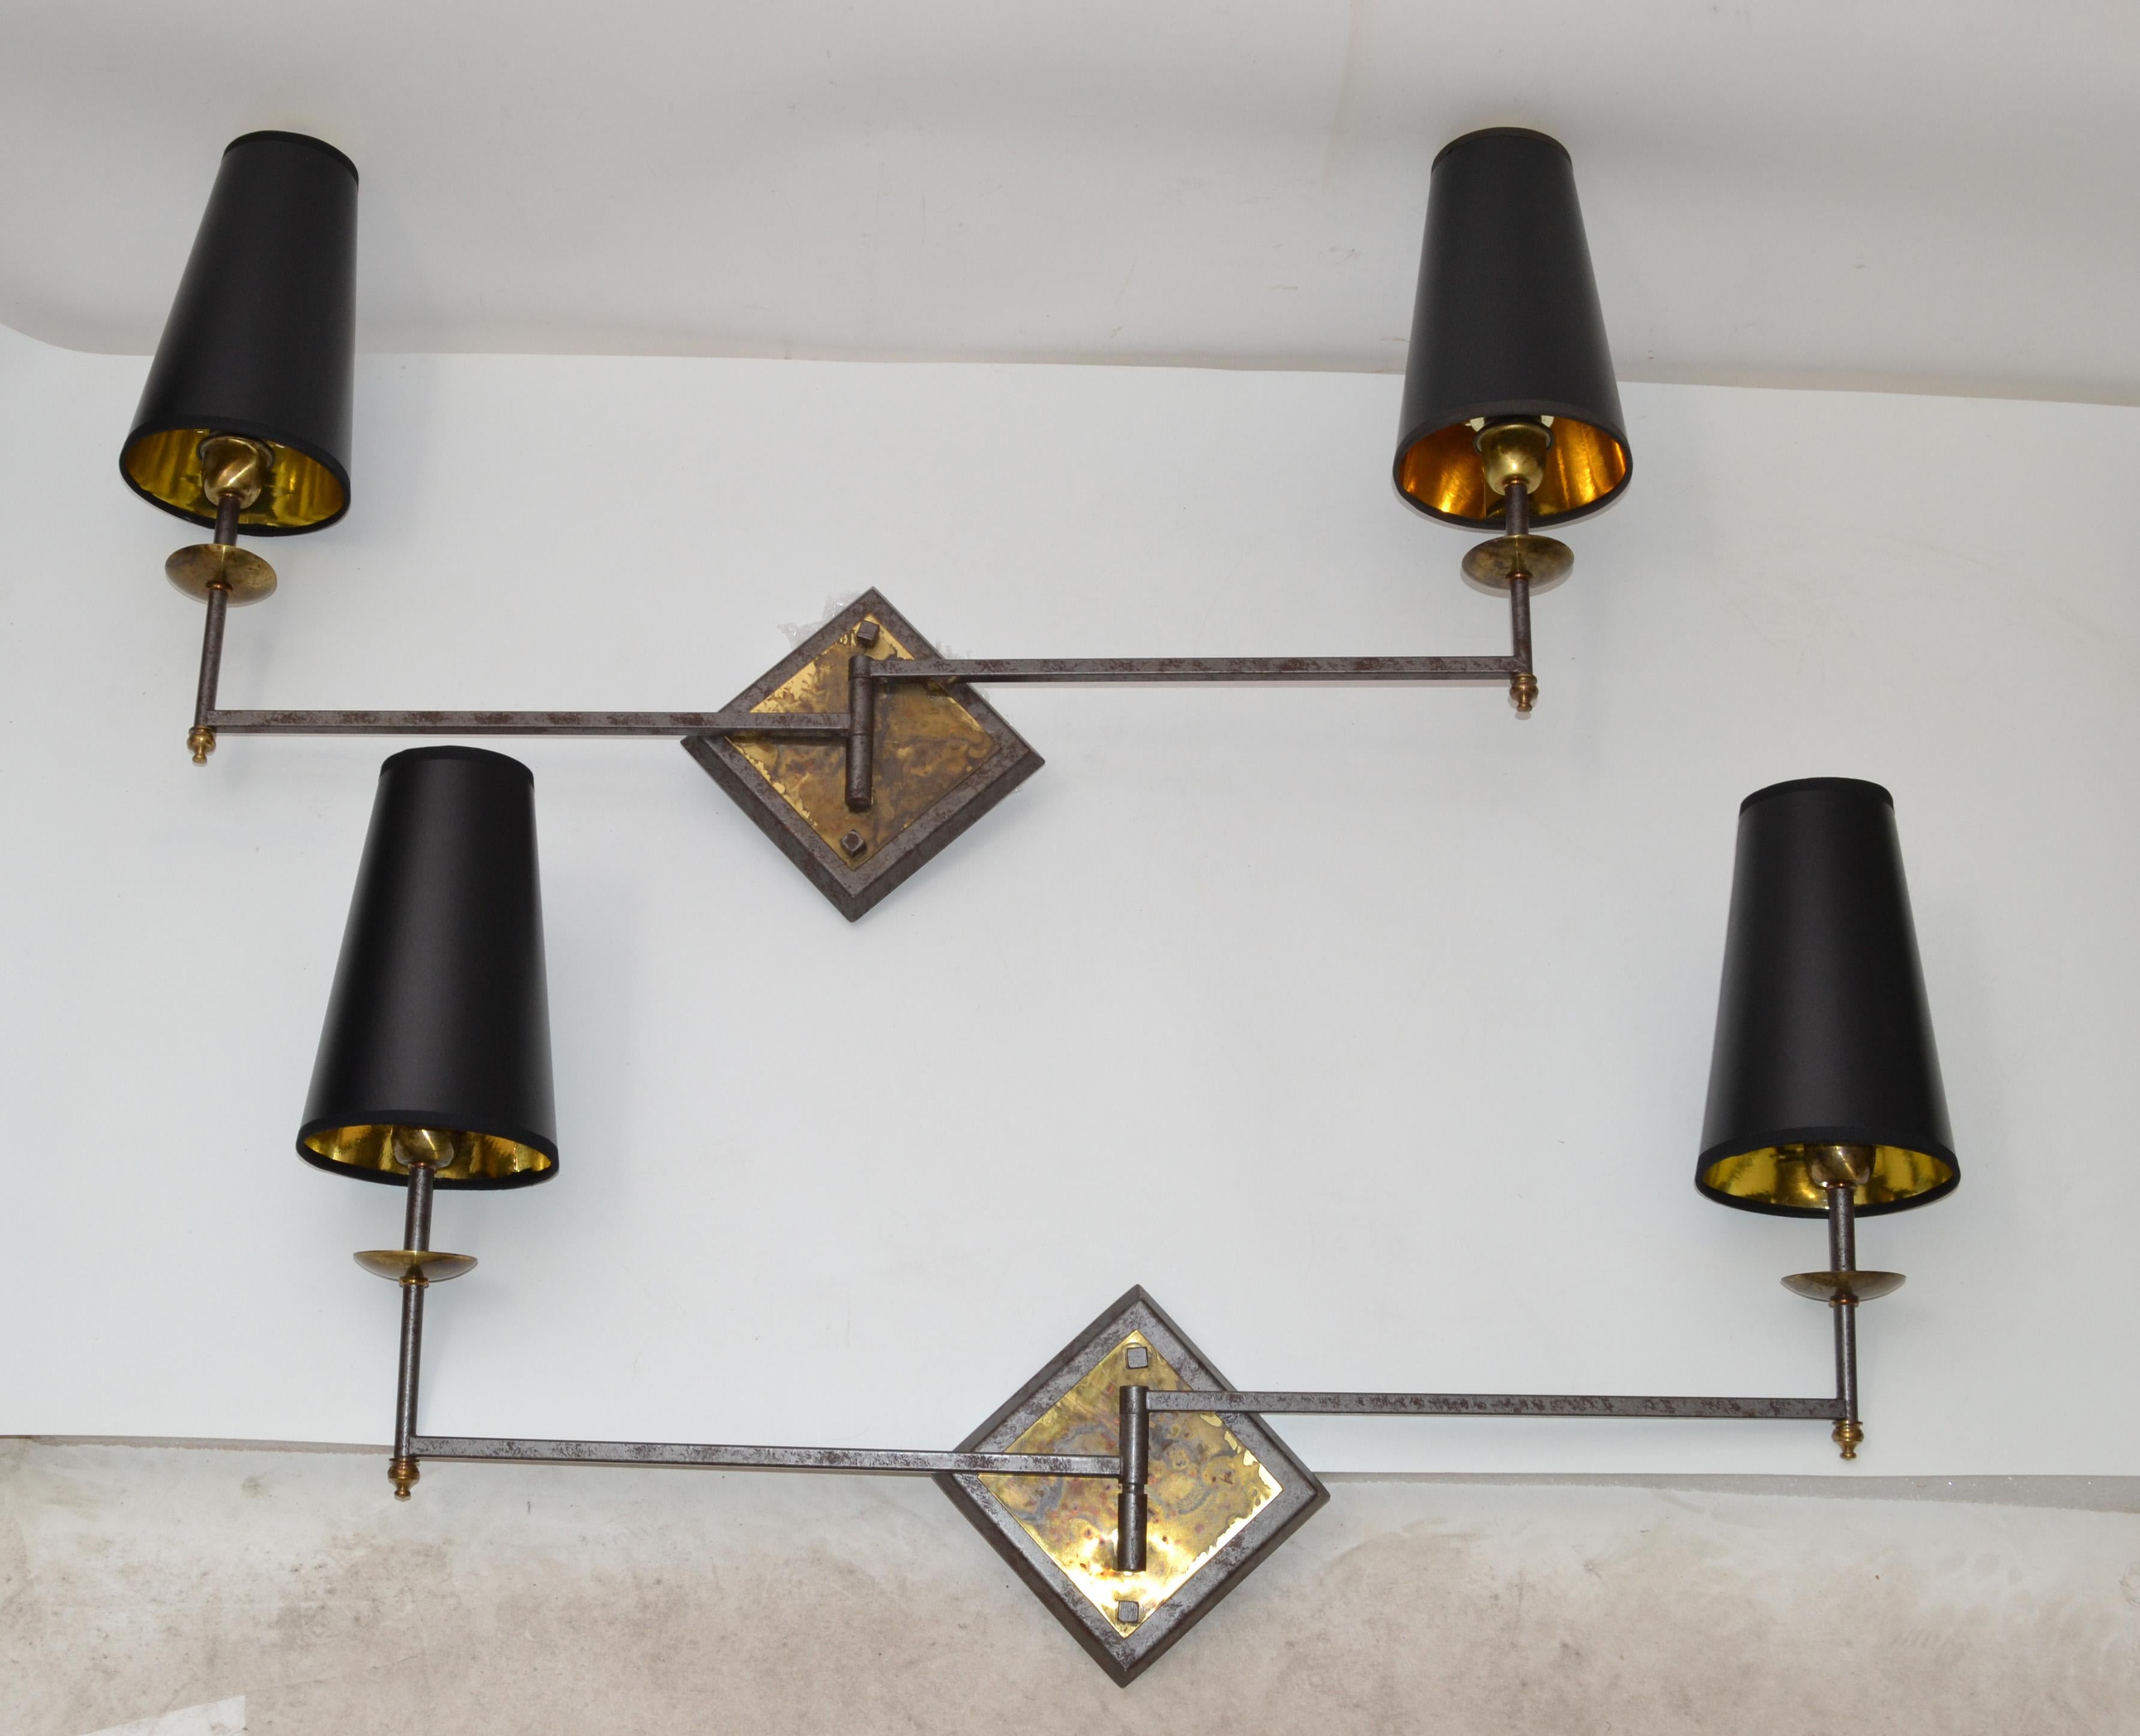 French Mid-Century Modern Metal and Brass Swing Arm Sconces, Wall Lights, Pair For Sale 10